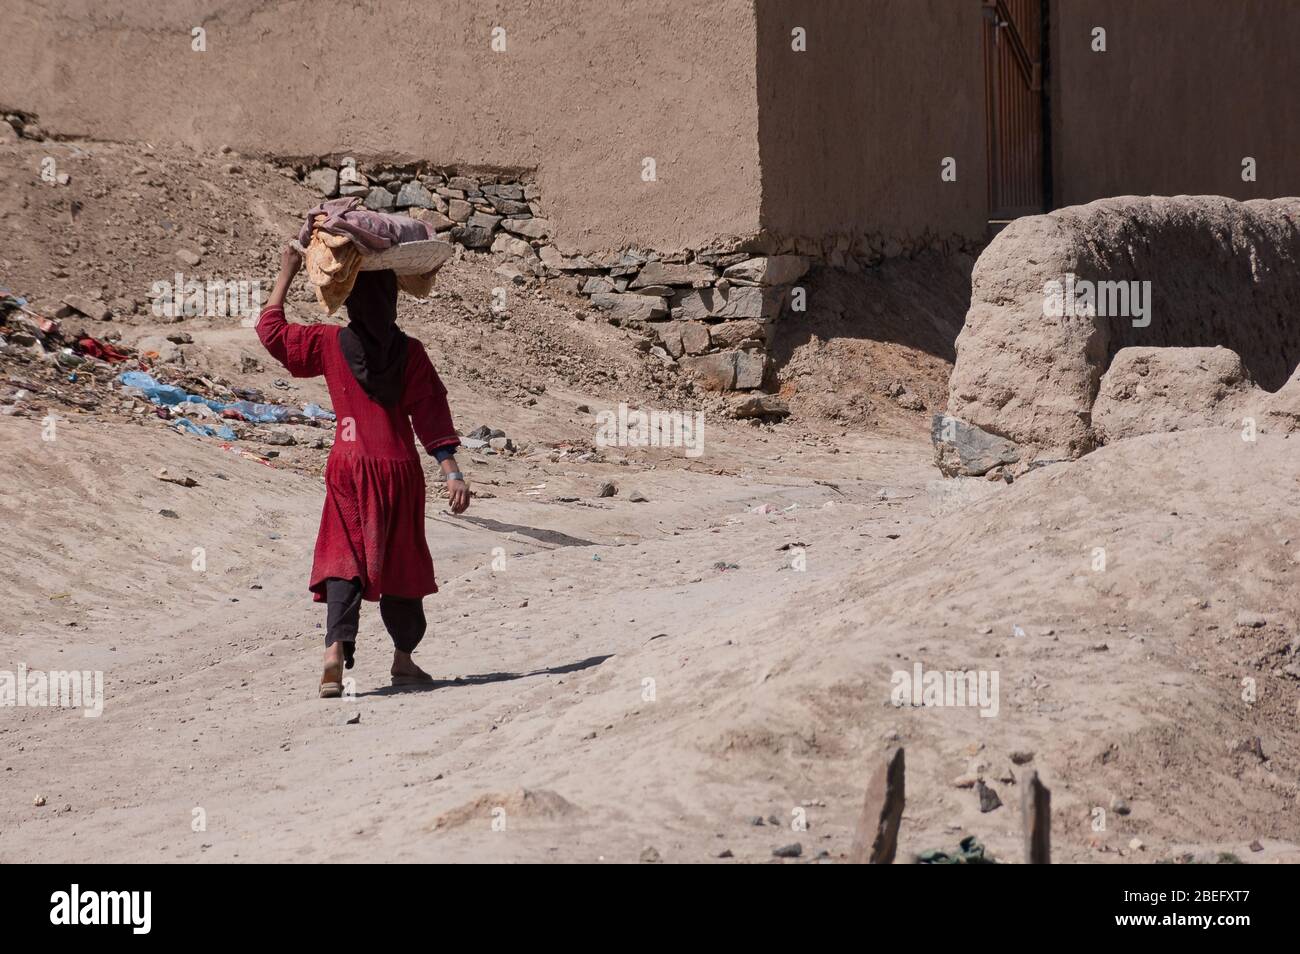 Kabul, Afghanistan - March 2004: Young girl walks home carrying bread Stock Photo